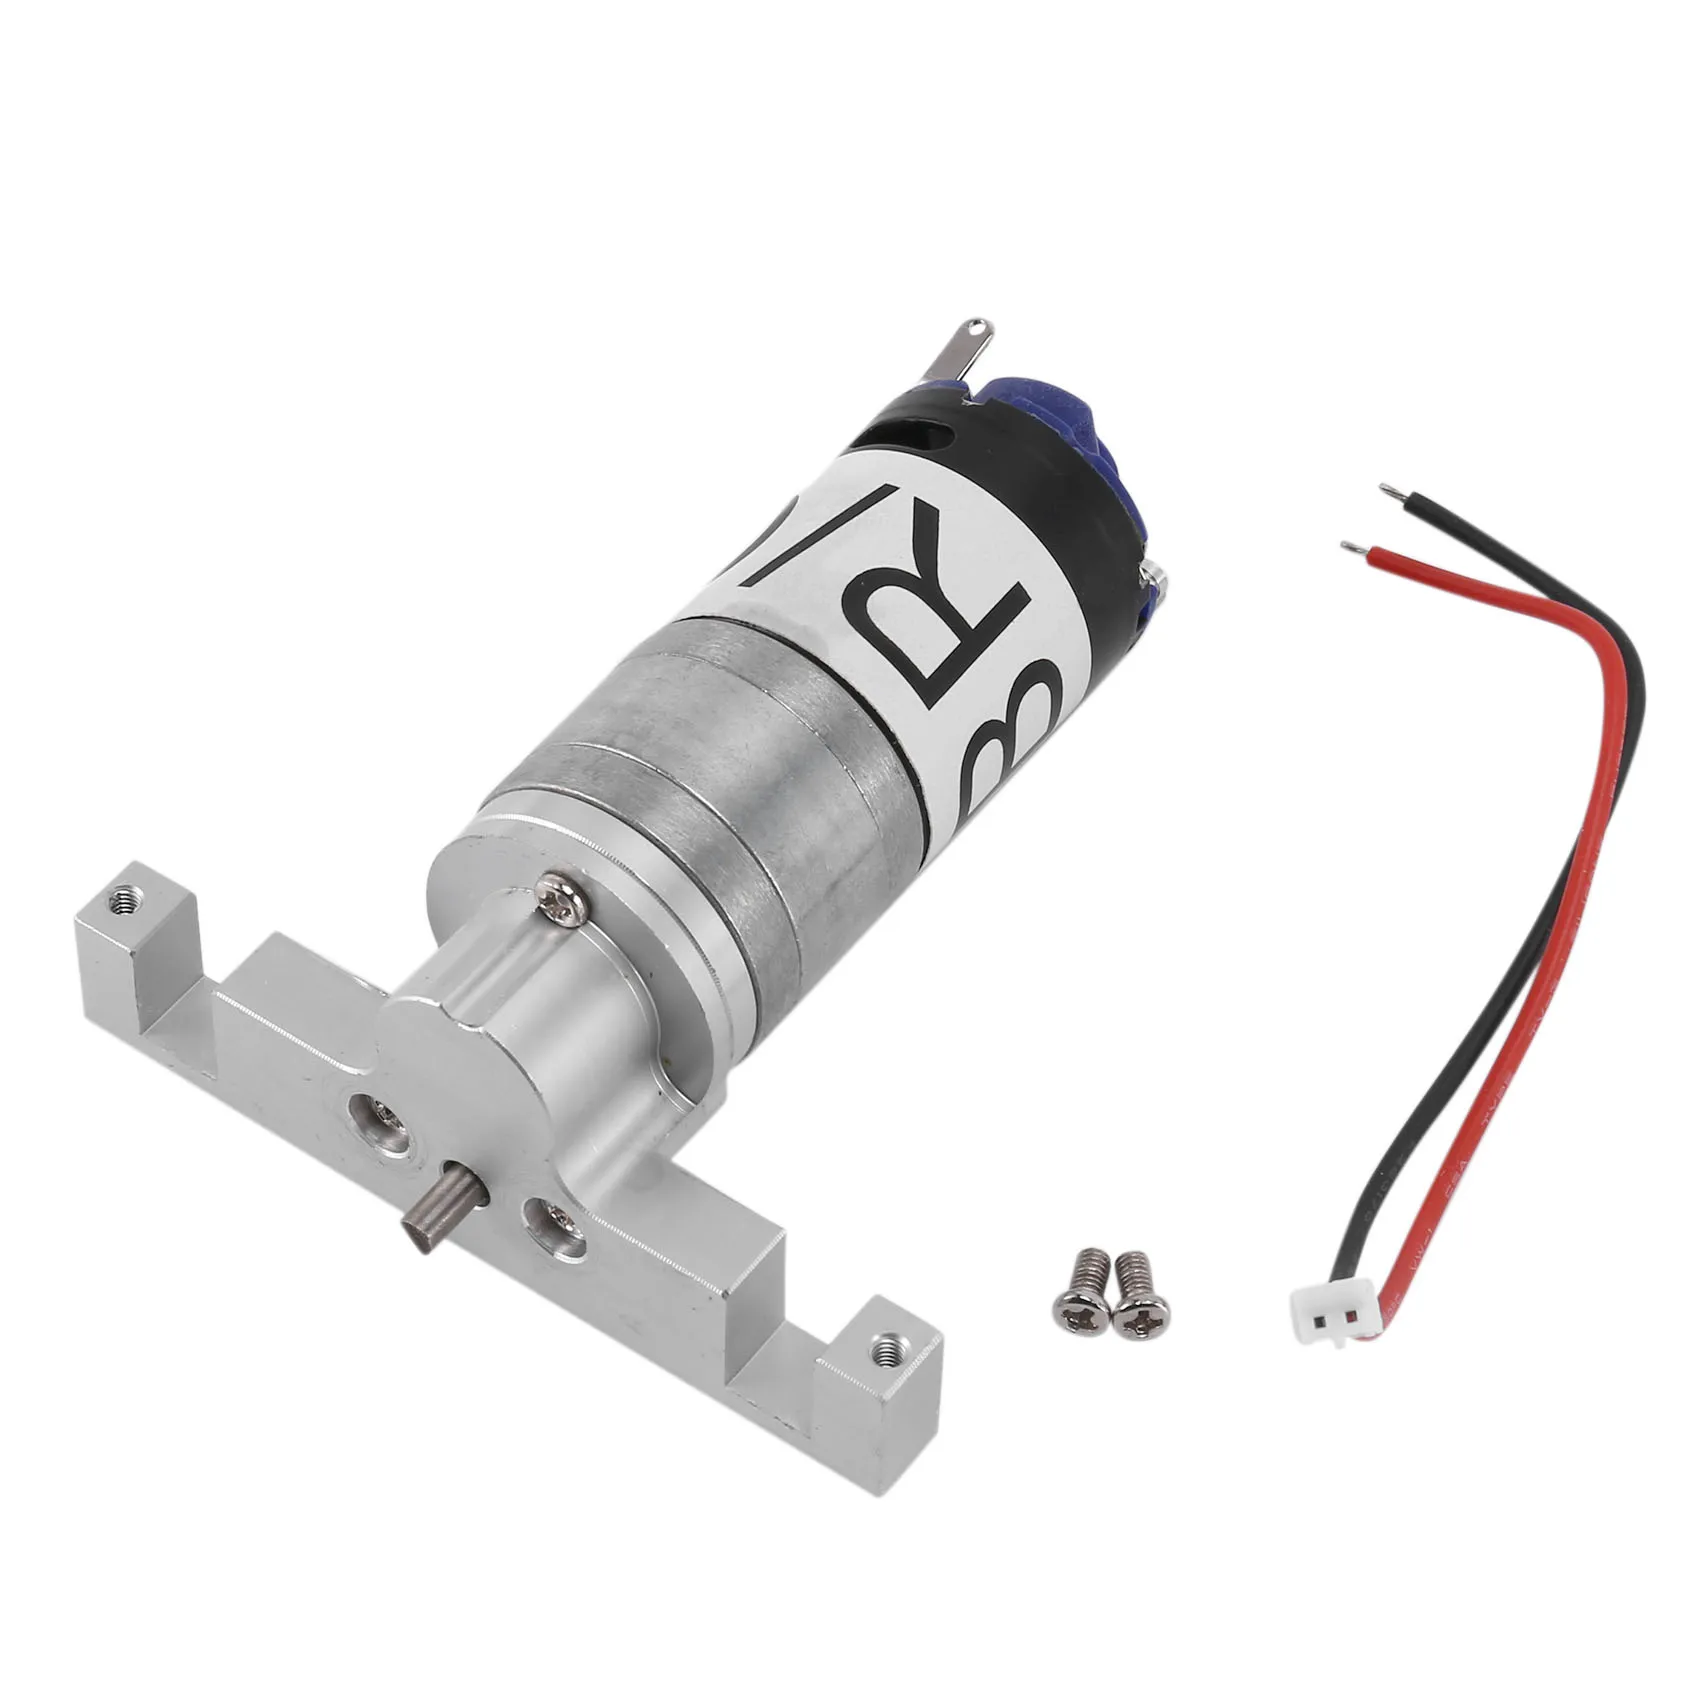 

for WPL D12 Powerful High Torque 370 Motor Metal Transmission Gearbox 1/10 RC Car Upgrade Parts Accessories